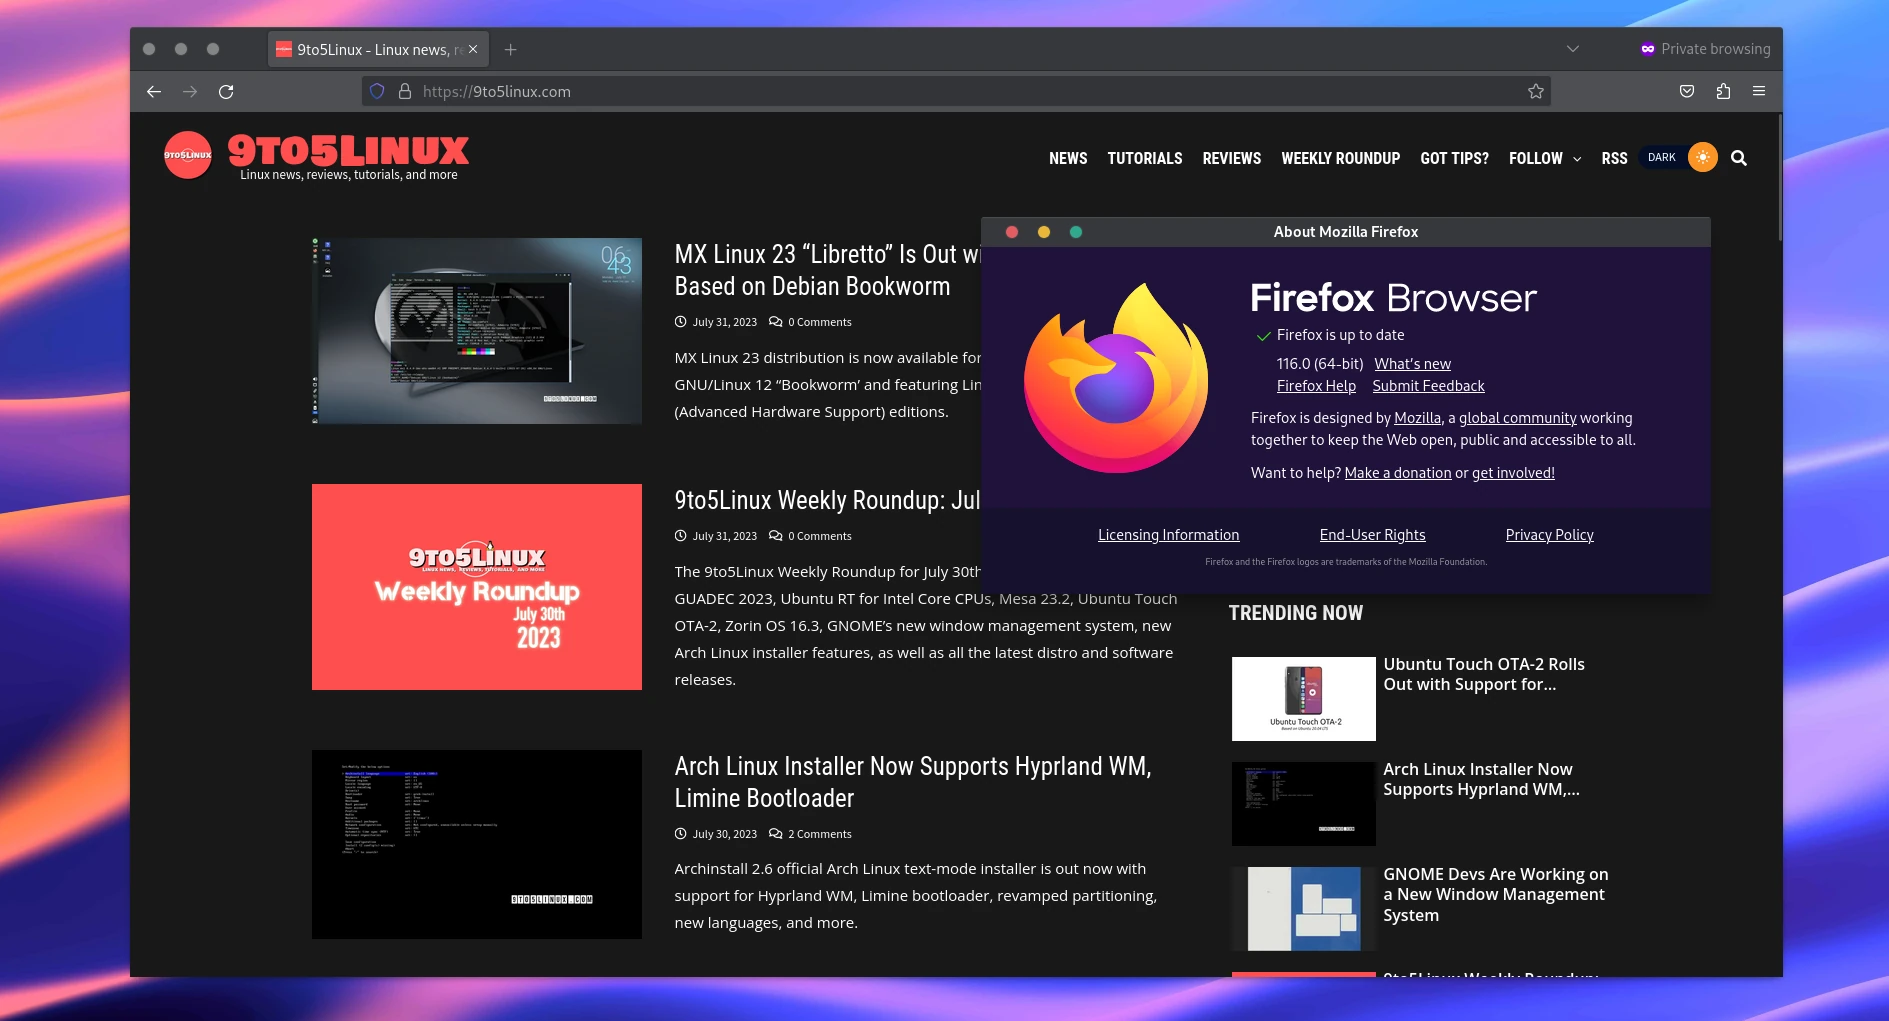 Firefox 116 Is Now Available for Download, This Is What’s New